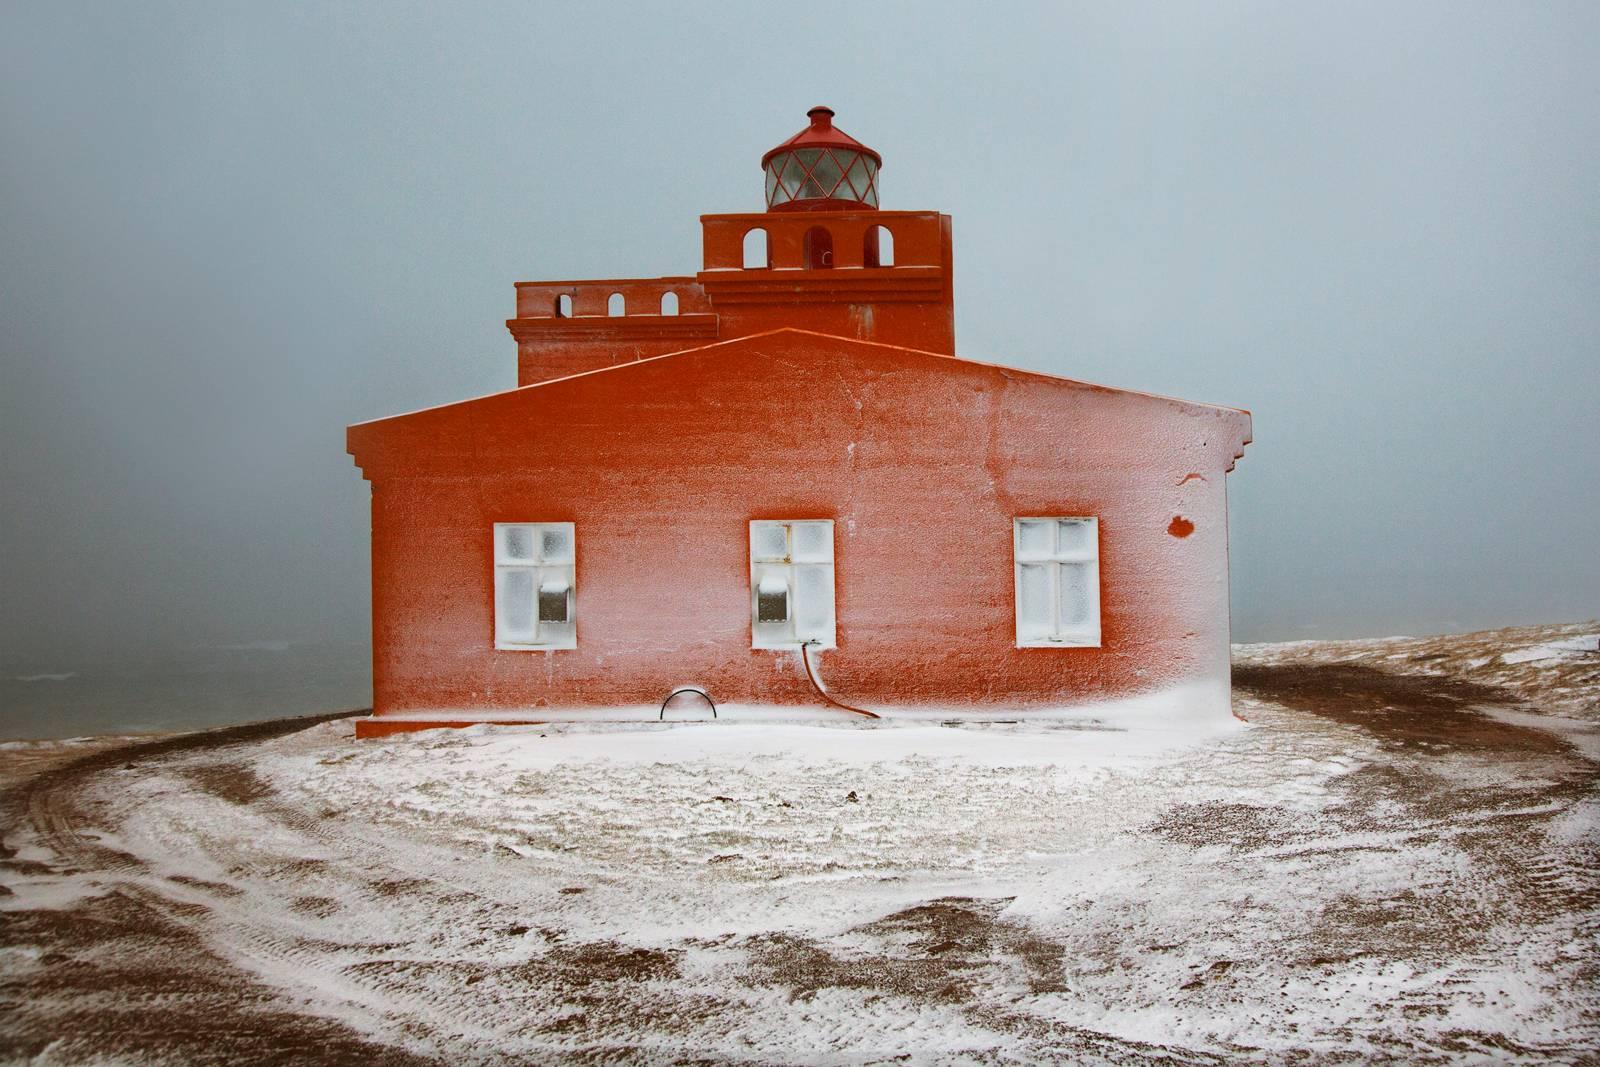 Lighthouse is a limited-edition photograph by French contemporary artist Christophe Jacrot. 

This photograph is sold unframed as a print only. It is available in 2 dimensions:
*60 cm × 90 cm (23.6" × 35.4"), edition of 12 copies
*80 × 120 cm (31.5"